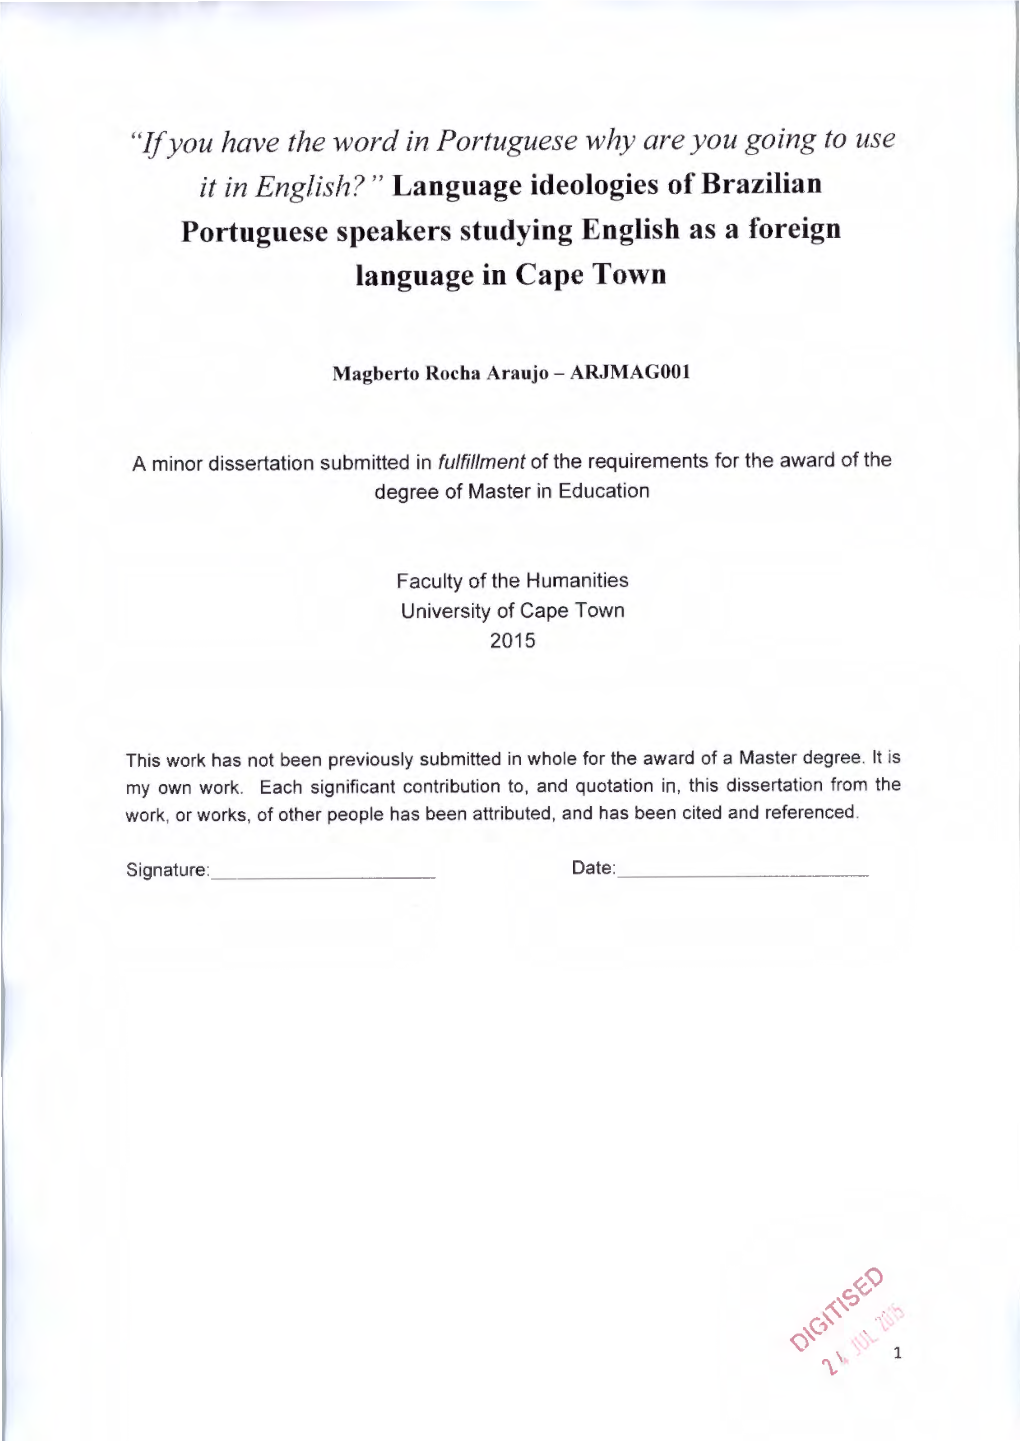 Language Ideologies of Brazilian Portuguese Speakers Studying English As a Foreign Language in Cape Town